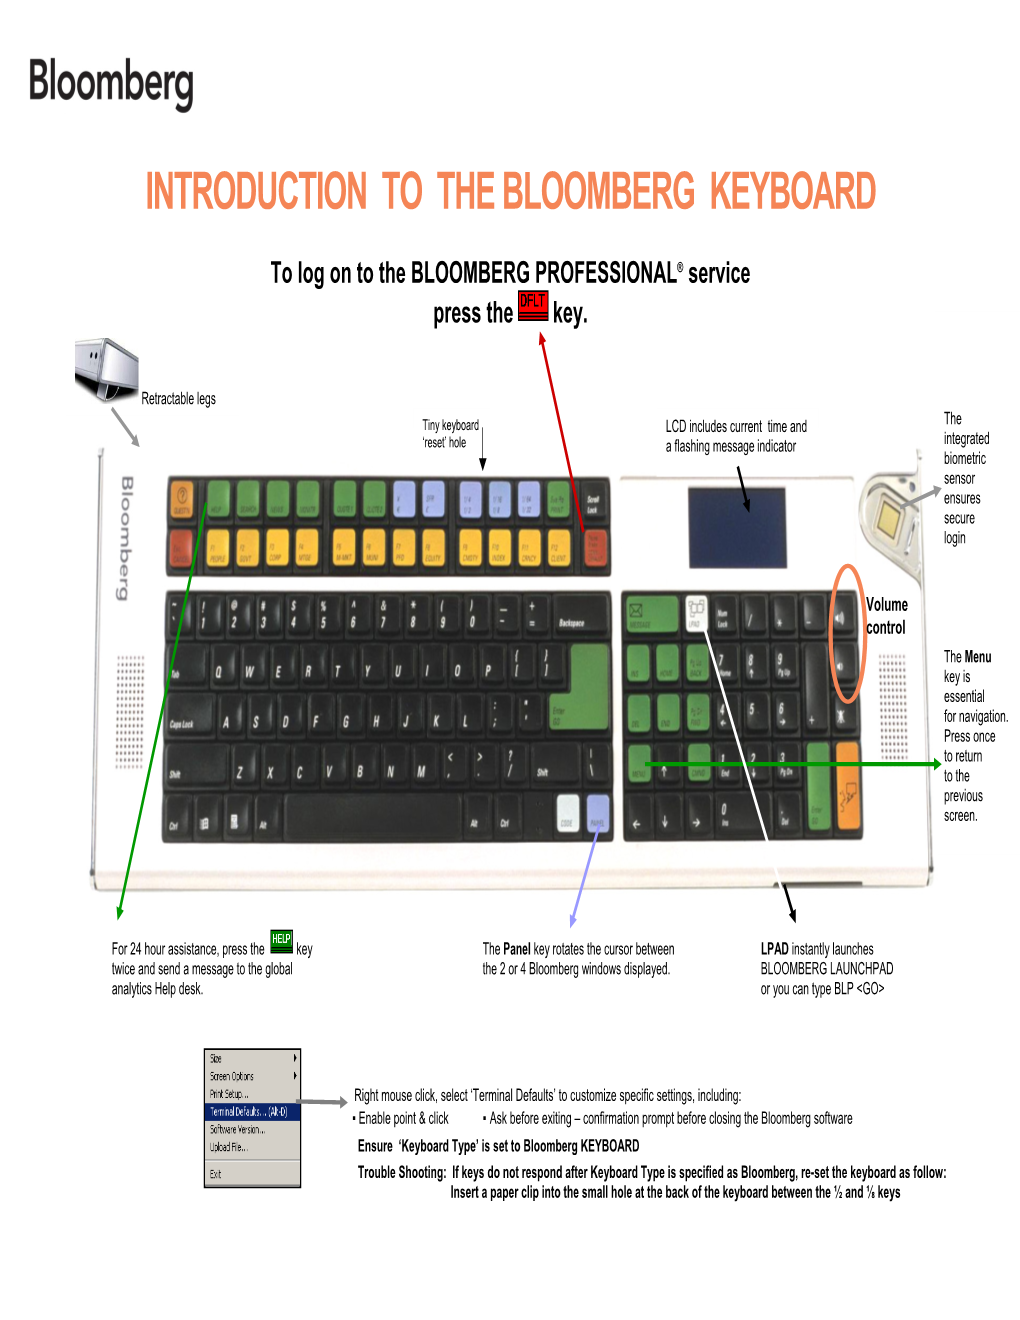 Introduction to the Bloomberg Keyboard